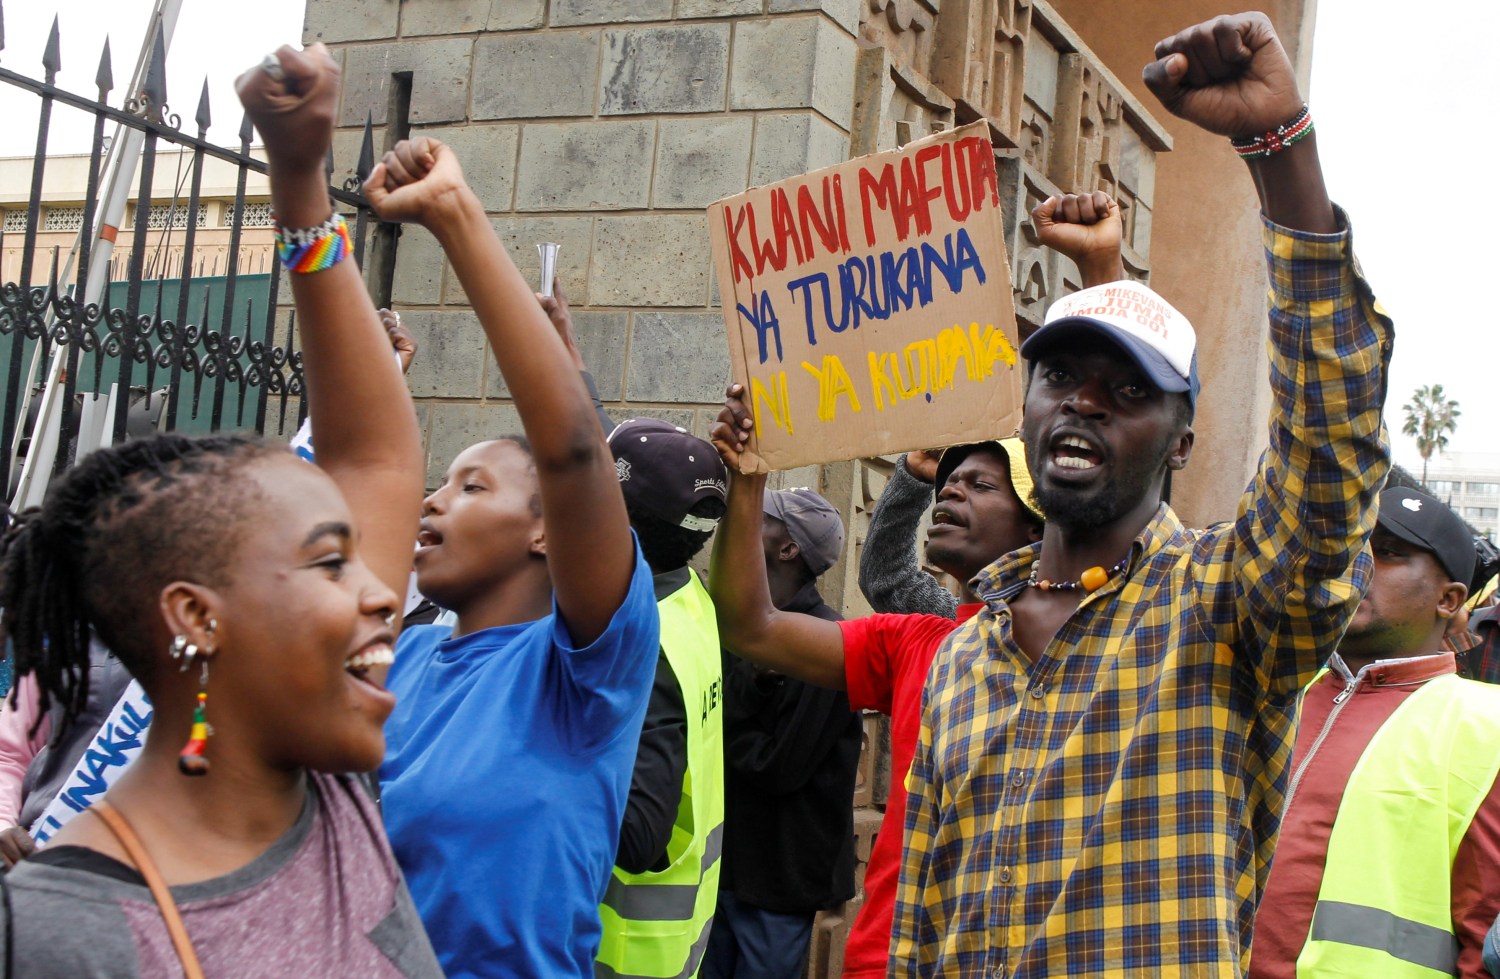 Activists from the social justice centres working group chant during a demonstration asking the government to lower costs of living, especially on food prices, in downtown Nairobi, Kenya May 17, 2022. REUTERS/Monicah Mwangi